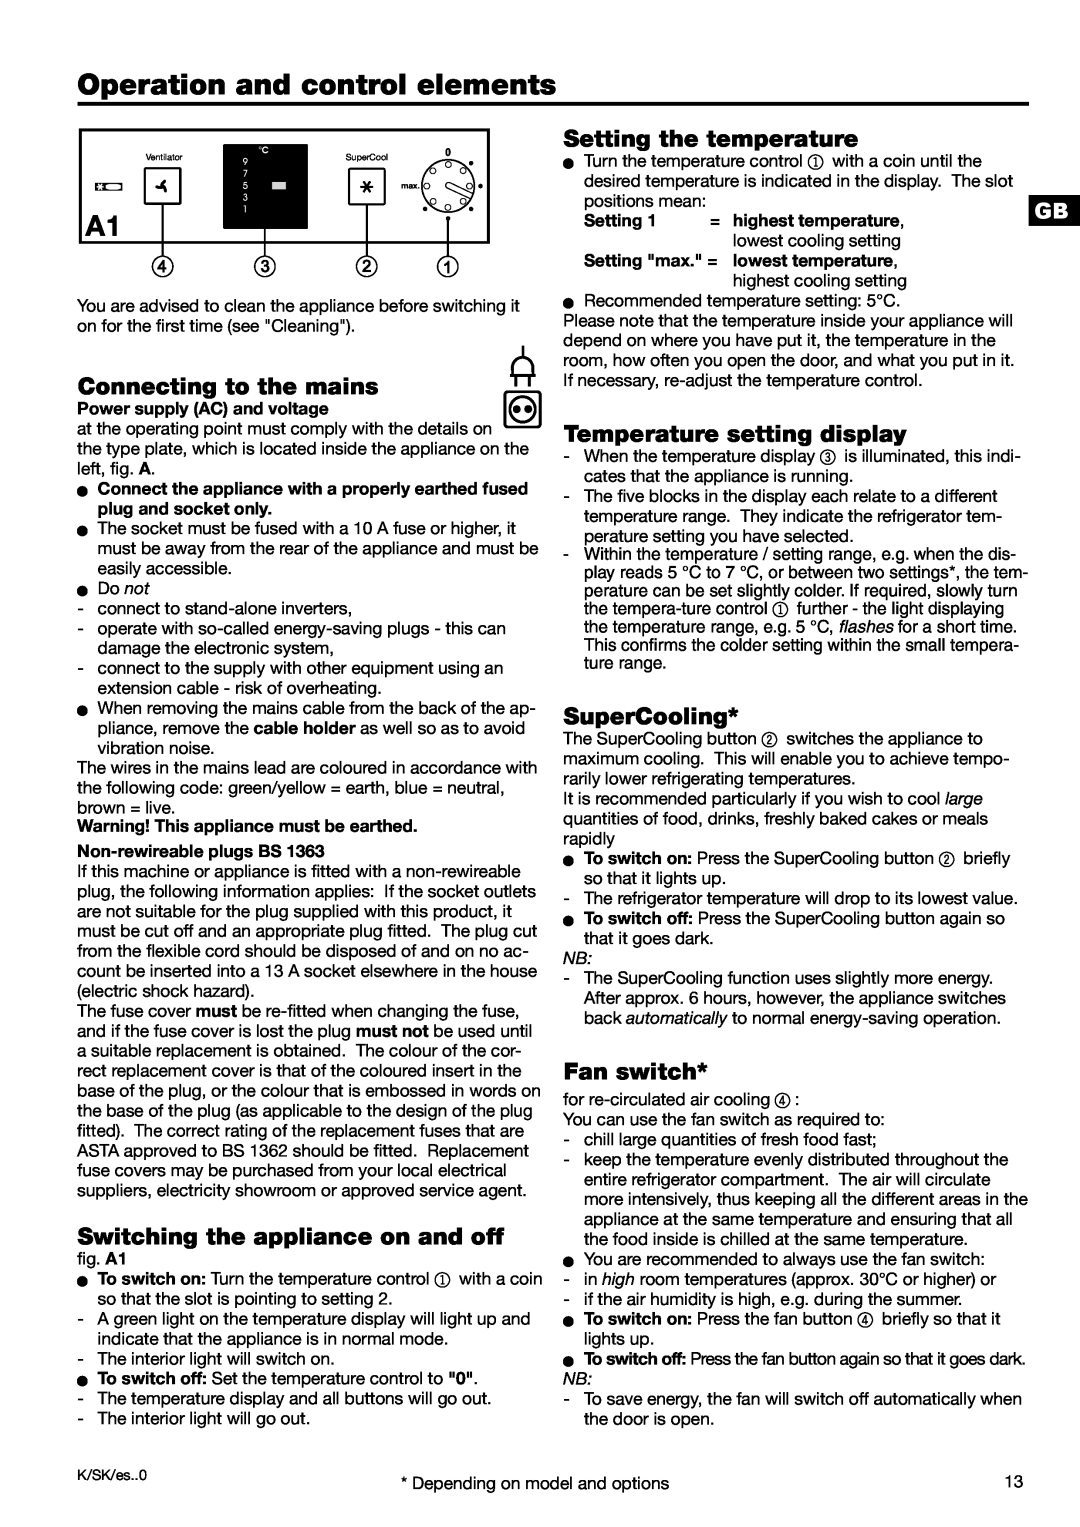 Liebherr 7082 218-03 manual Operation and control elements, Connecting to the mains, Switching the appliance on and off 